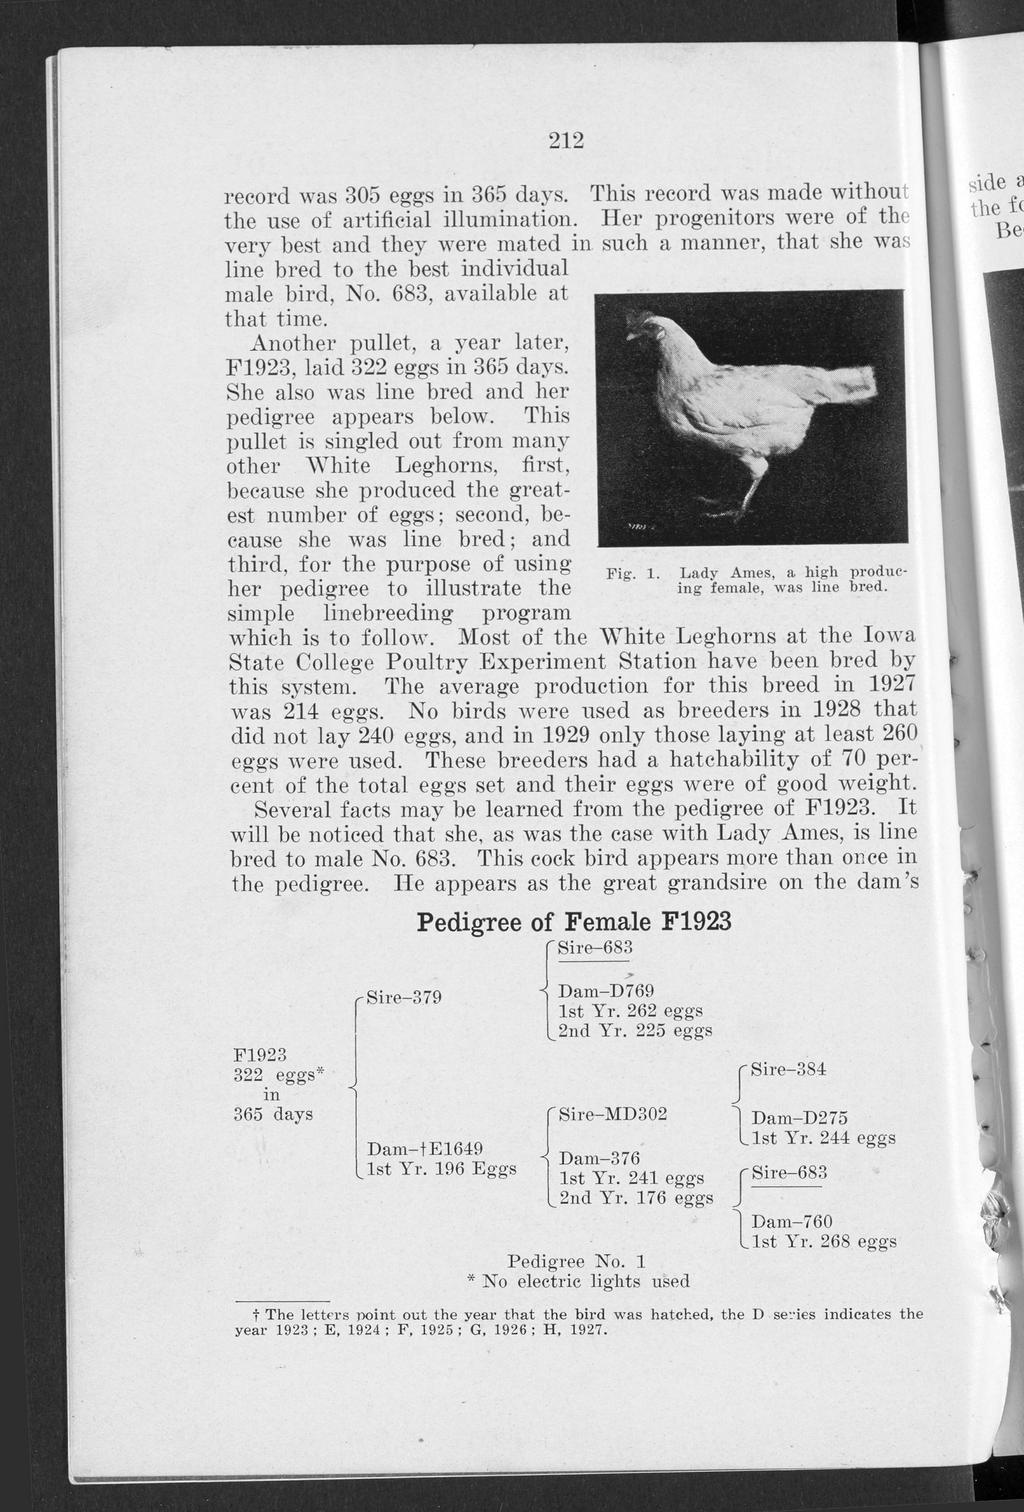 Bulletin, Vol. 22 [1928], No. 258, Art. 1 212 record was 305 eggs in 365 days. This record was made without the use of artificial illumination.